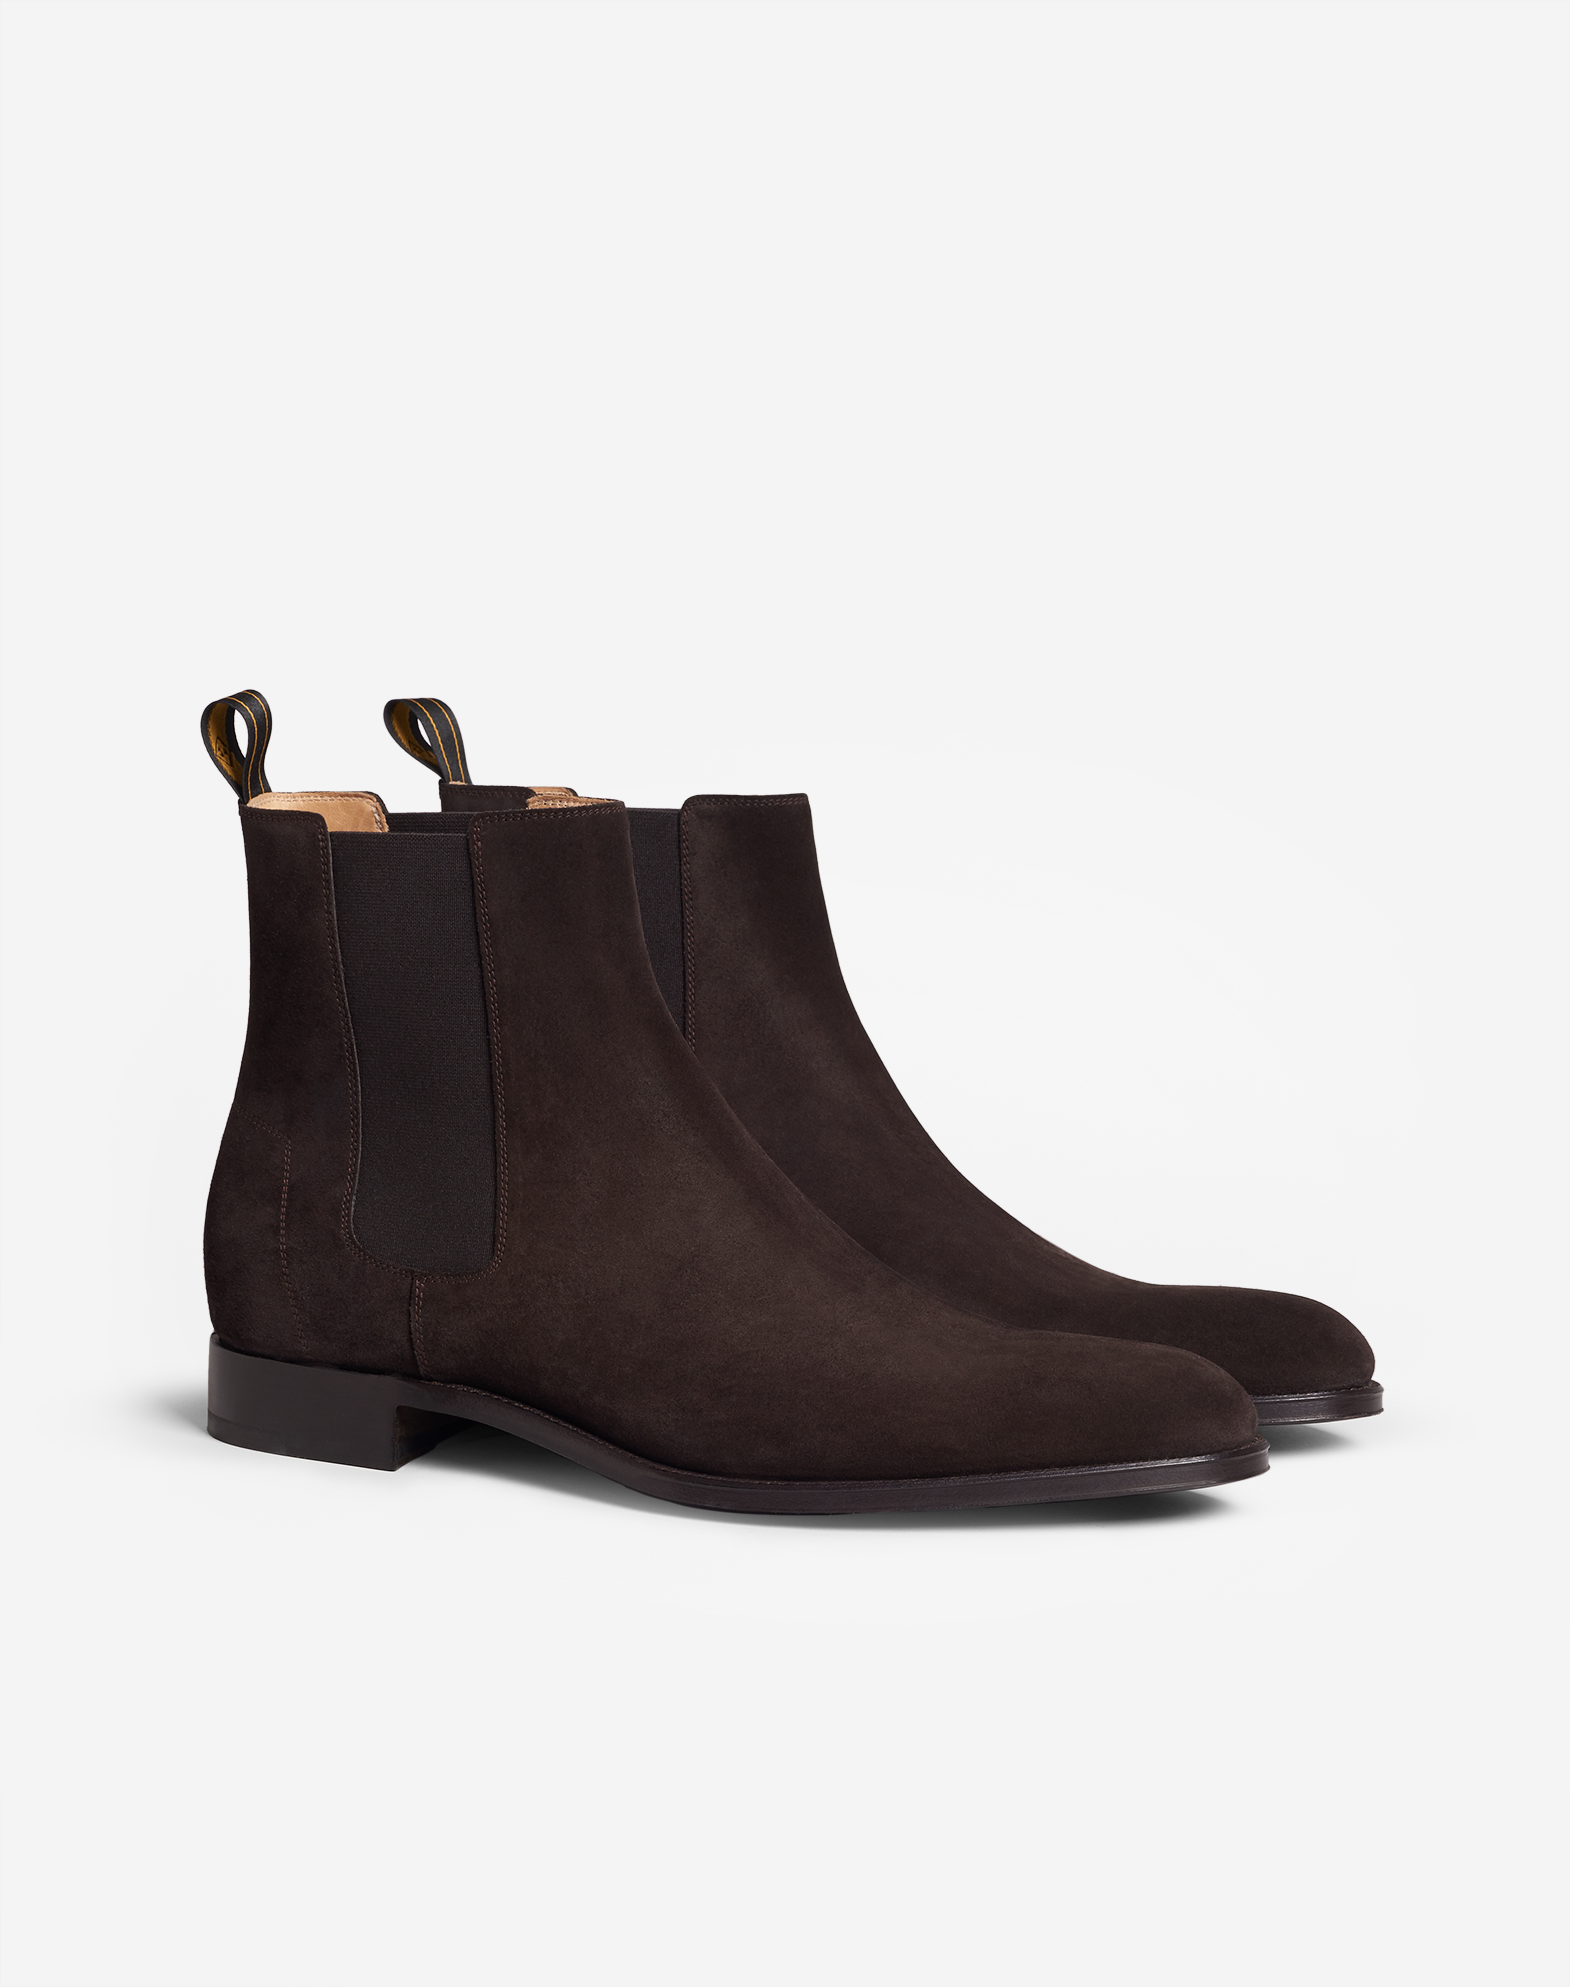 Dunhill Luxury Men's Boots